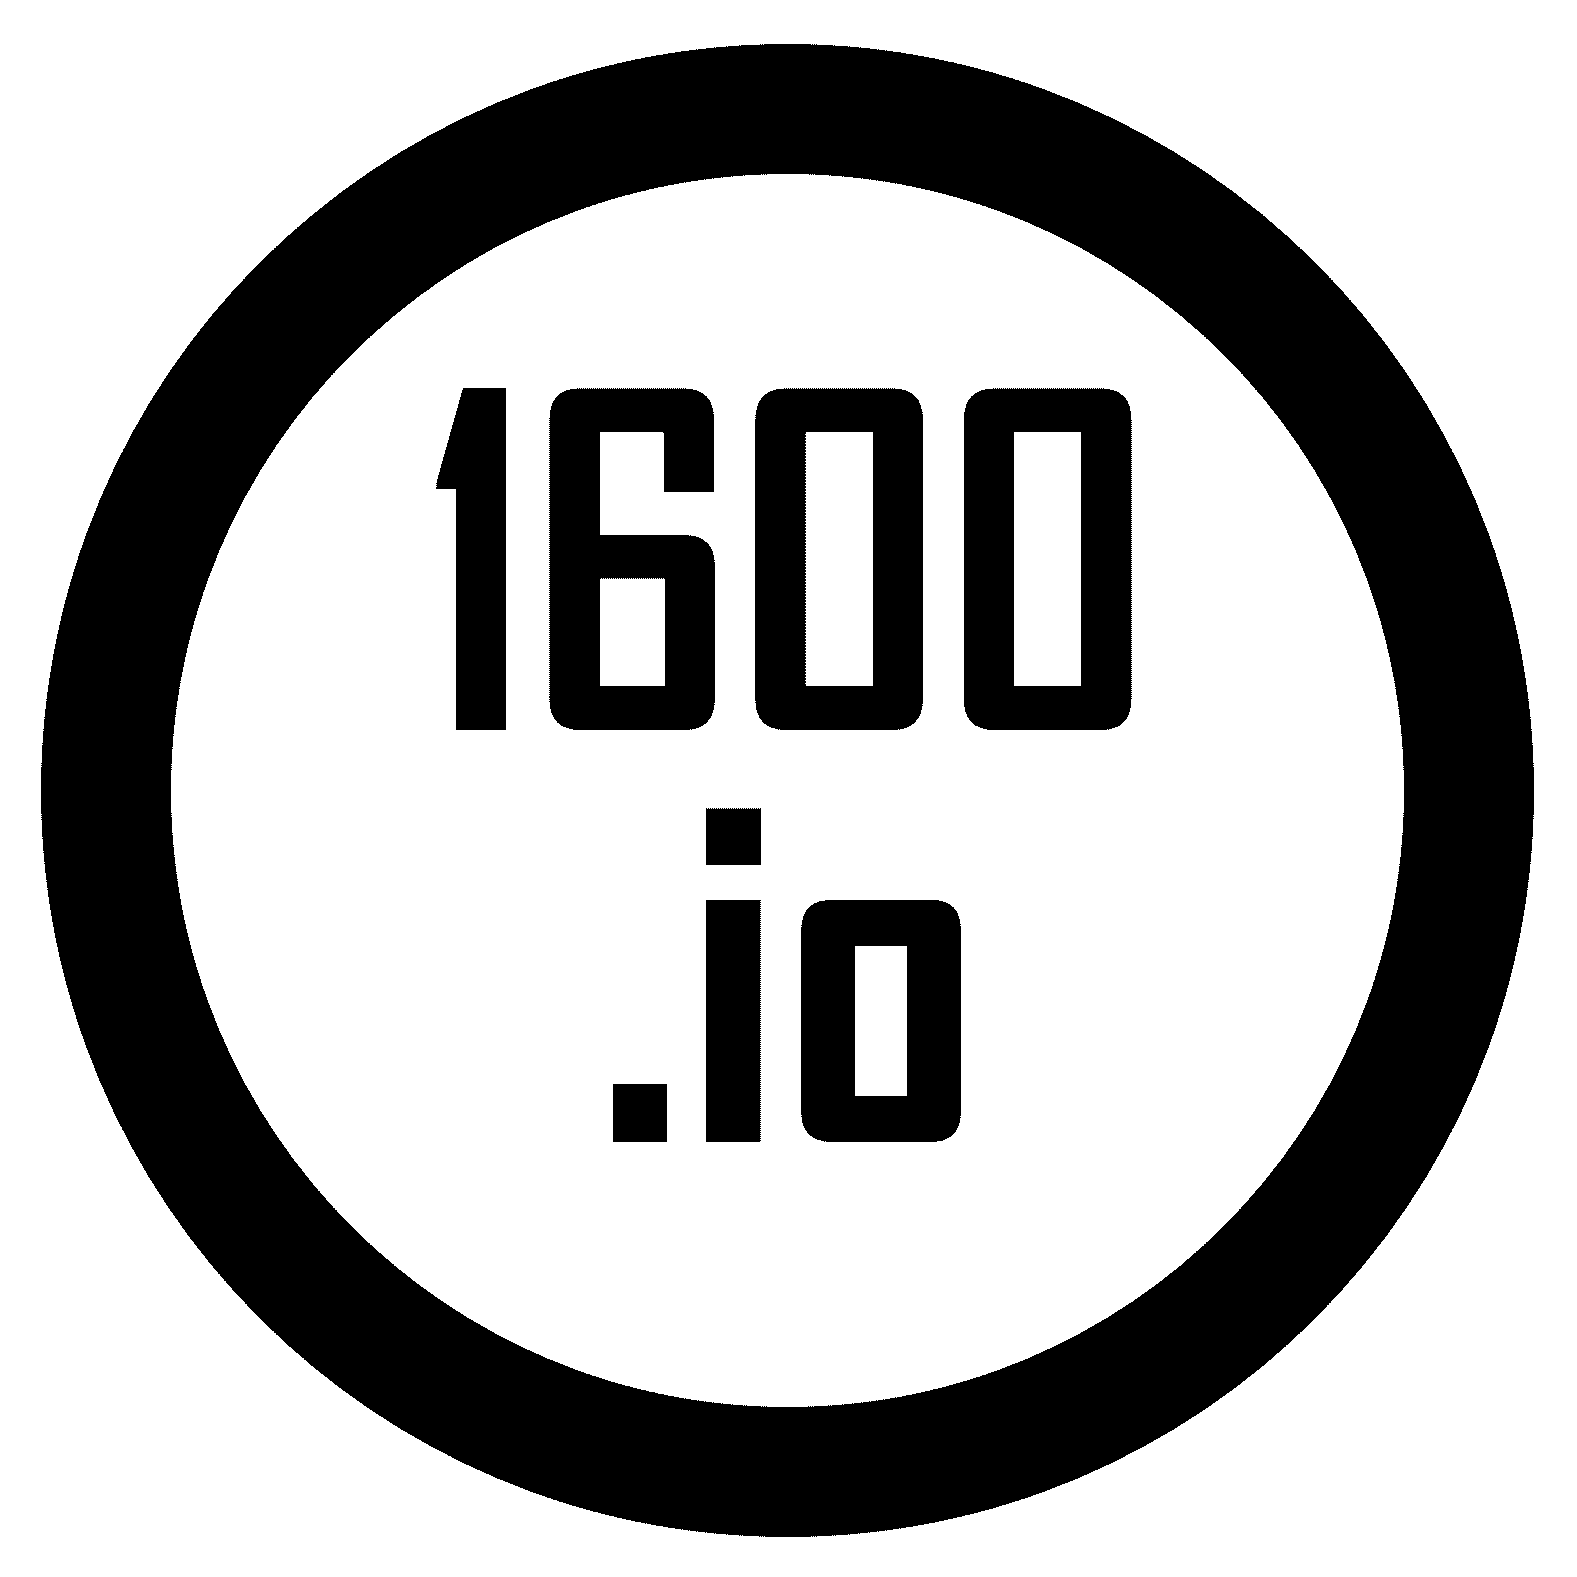 1600.io: The Smart Solution to the Test Prep Problem